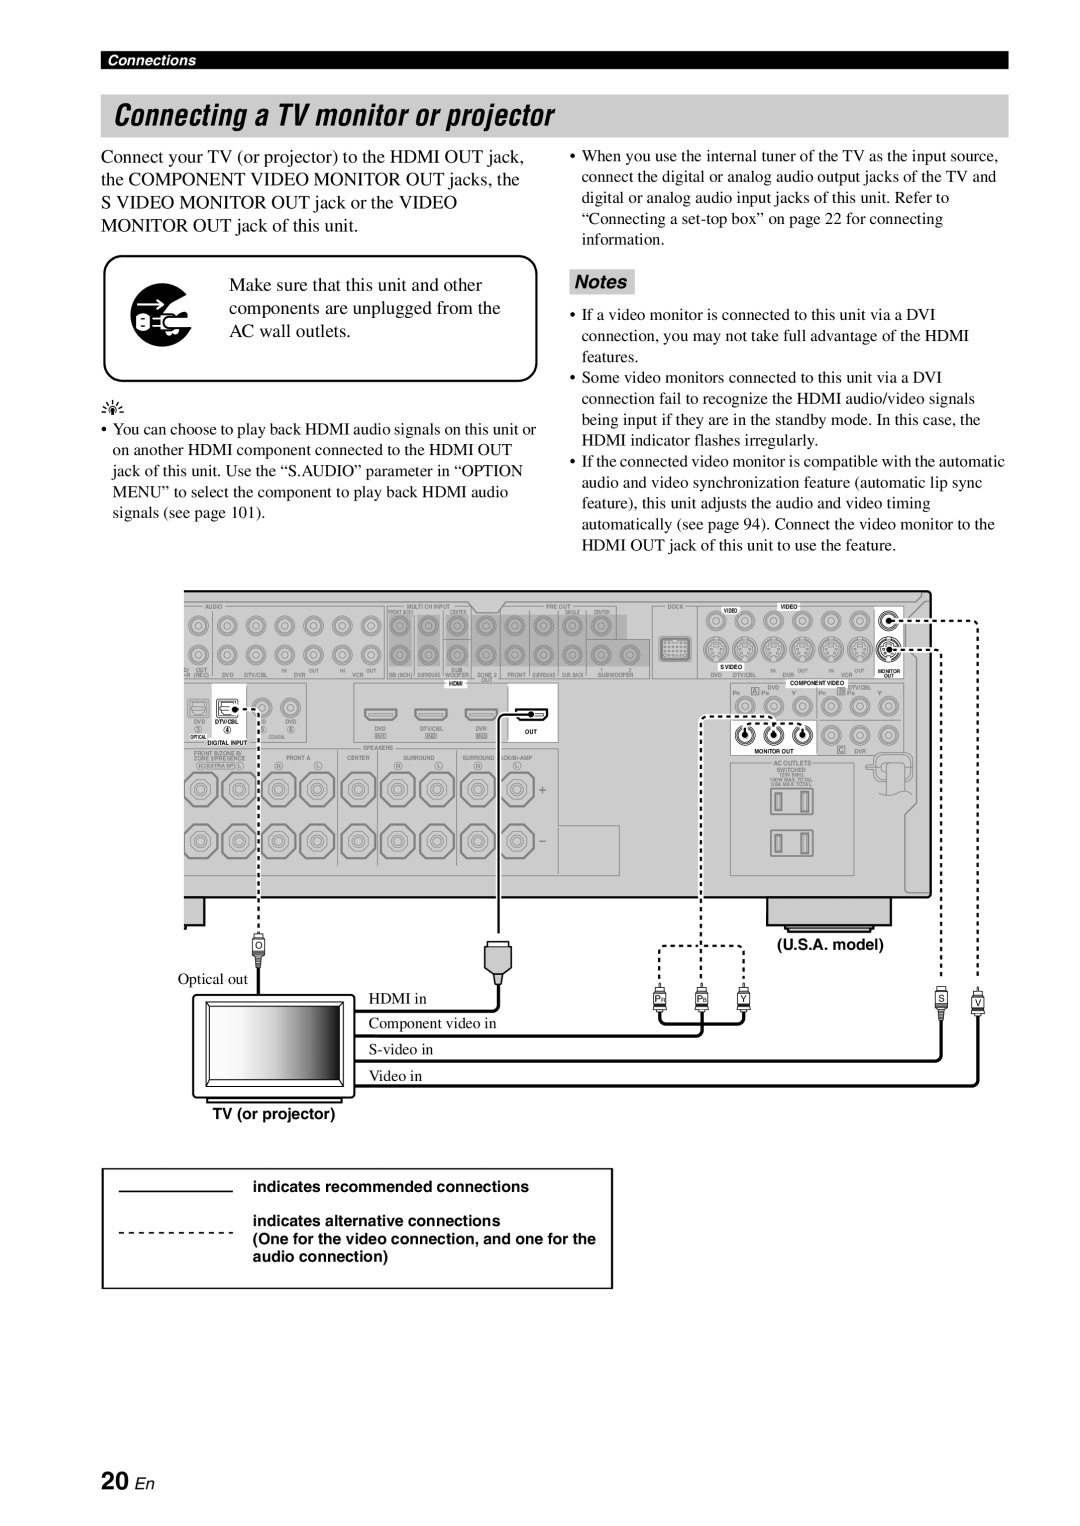 Yamaha HTR-6180 owner manual Connecting a TV monitor or projector, 20 En 